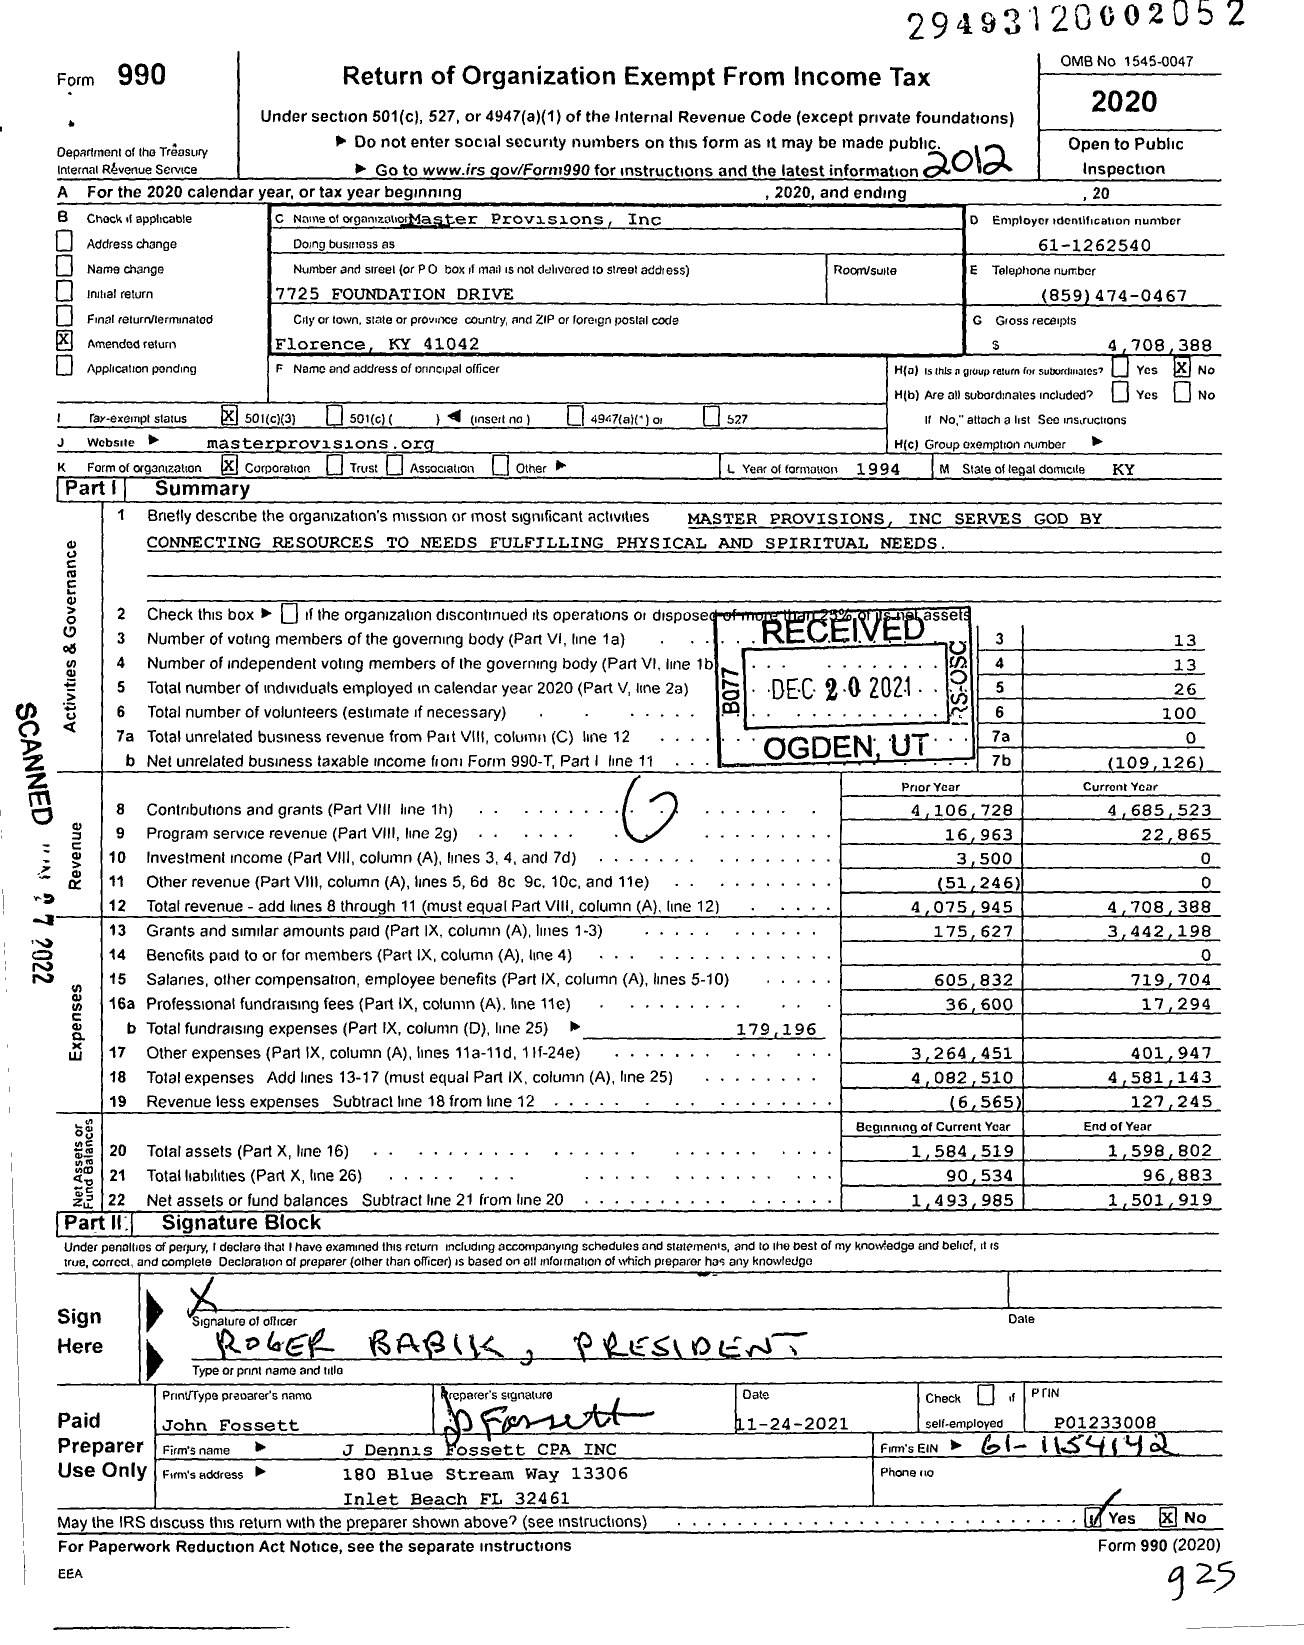 Image of first page of 2020 Form 990 for Master Provisions